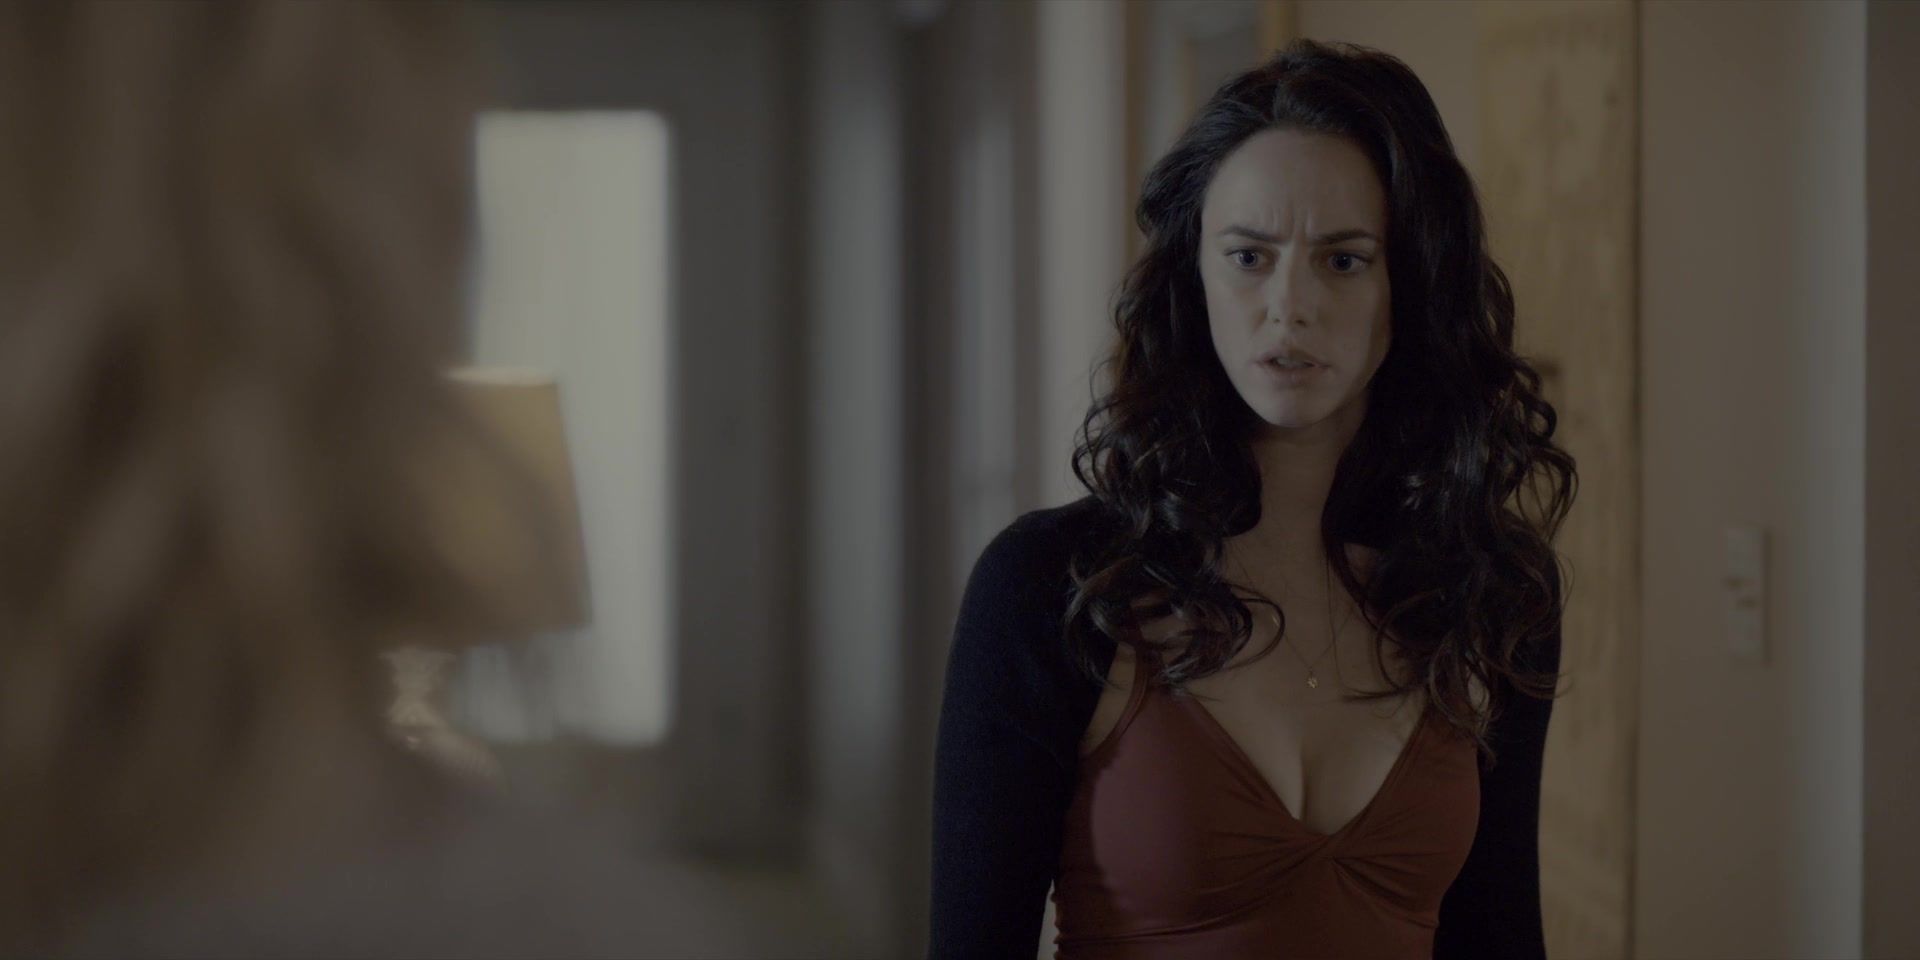 And Nude Kaya Scodelario - Spinning Out s01e01-08 (2020) XTwisted